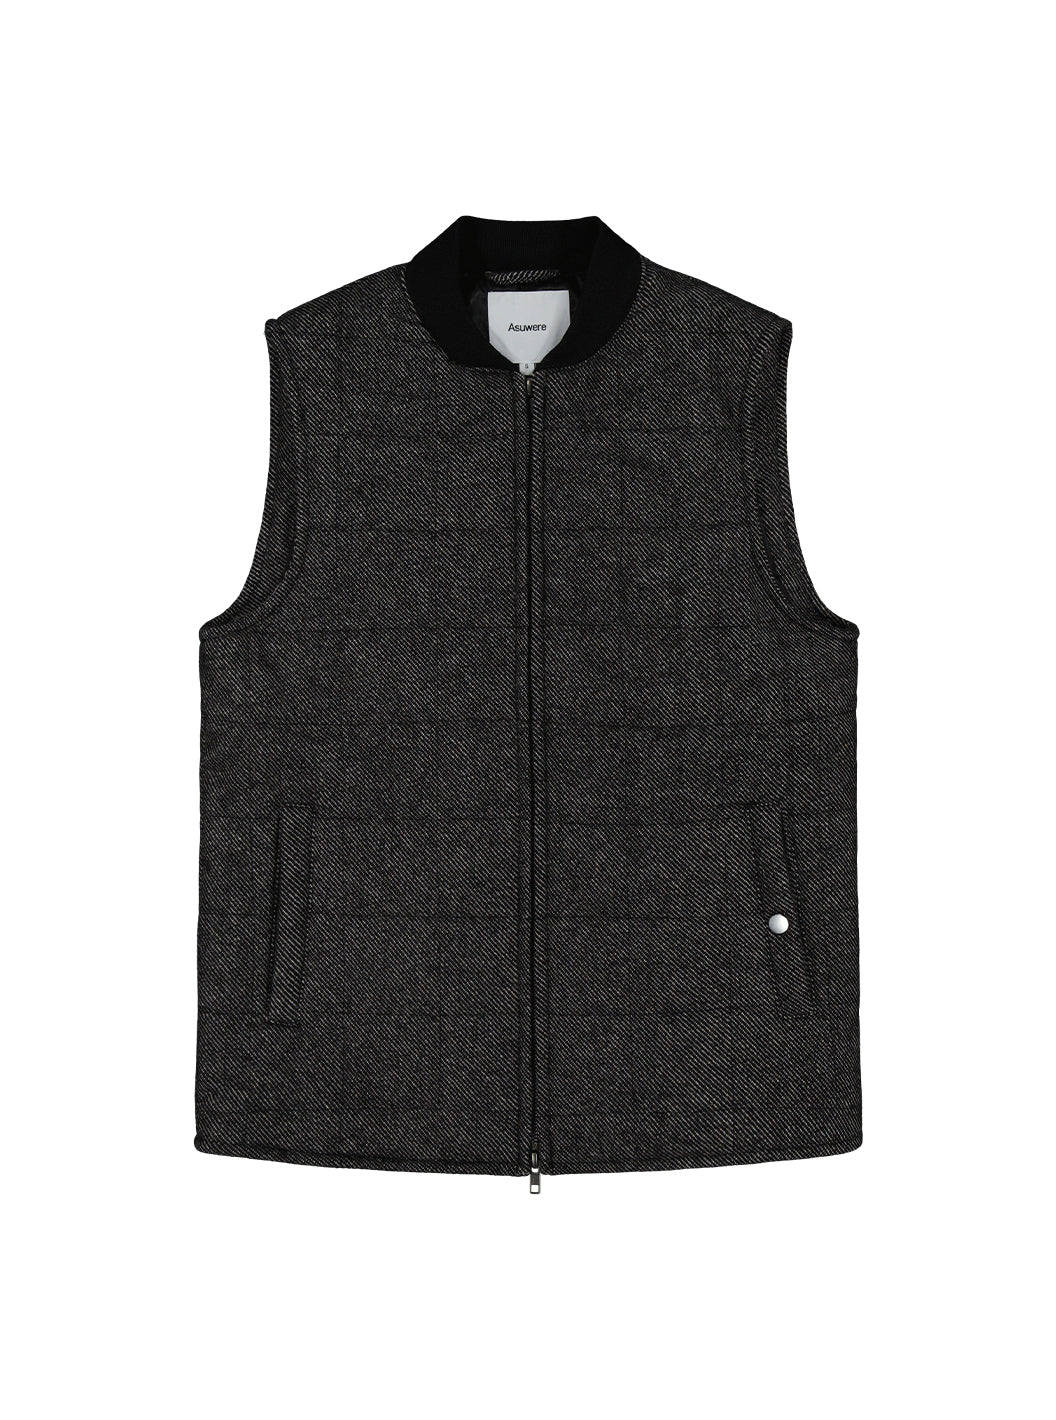 Front image of Quilted Vest in Charcoal